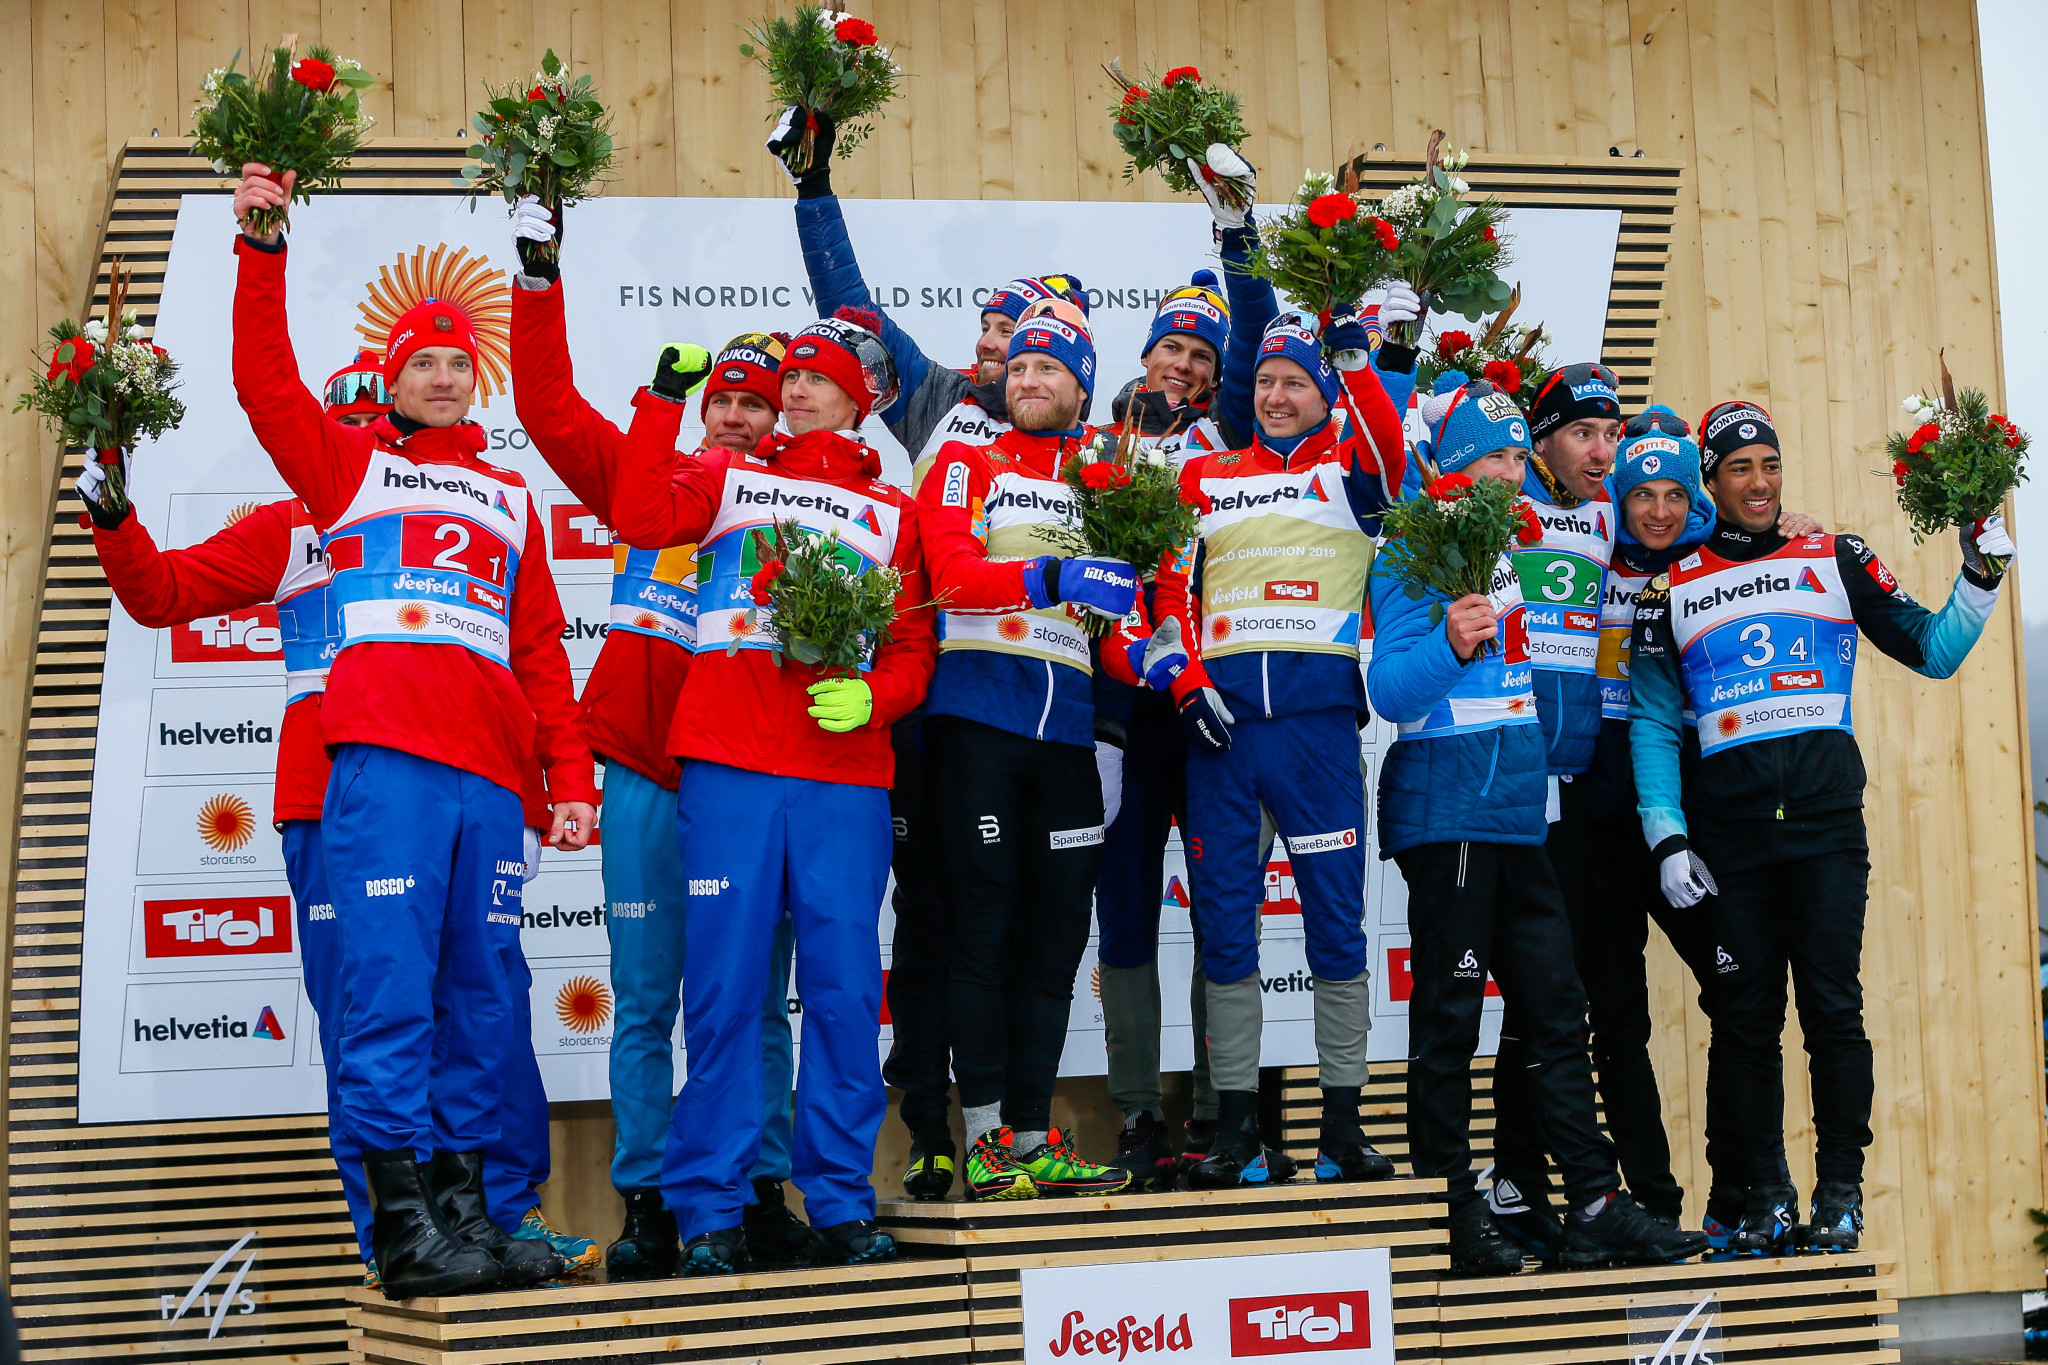 Norway won the 4x10km cross-country relay for the 10th time at the World Championships ©Getty Images